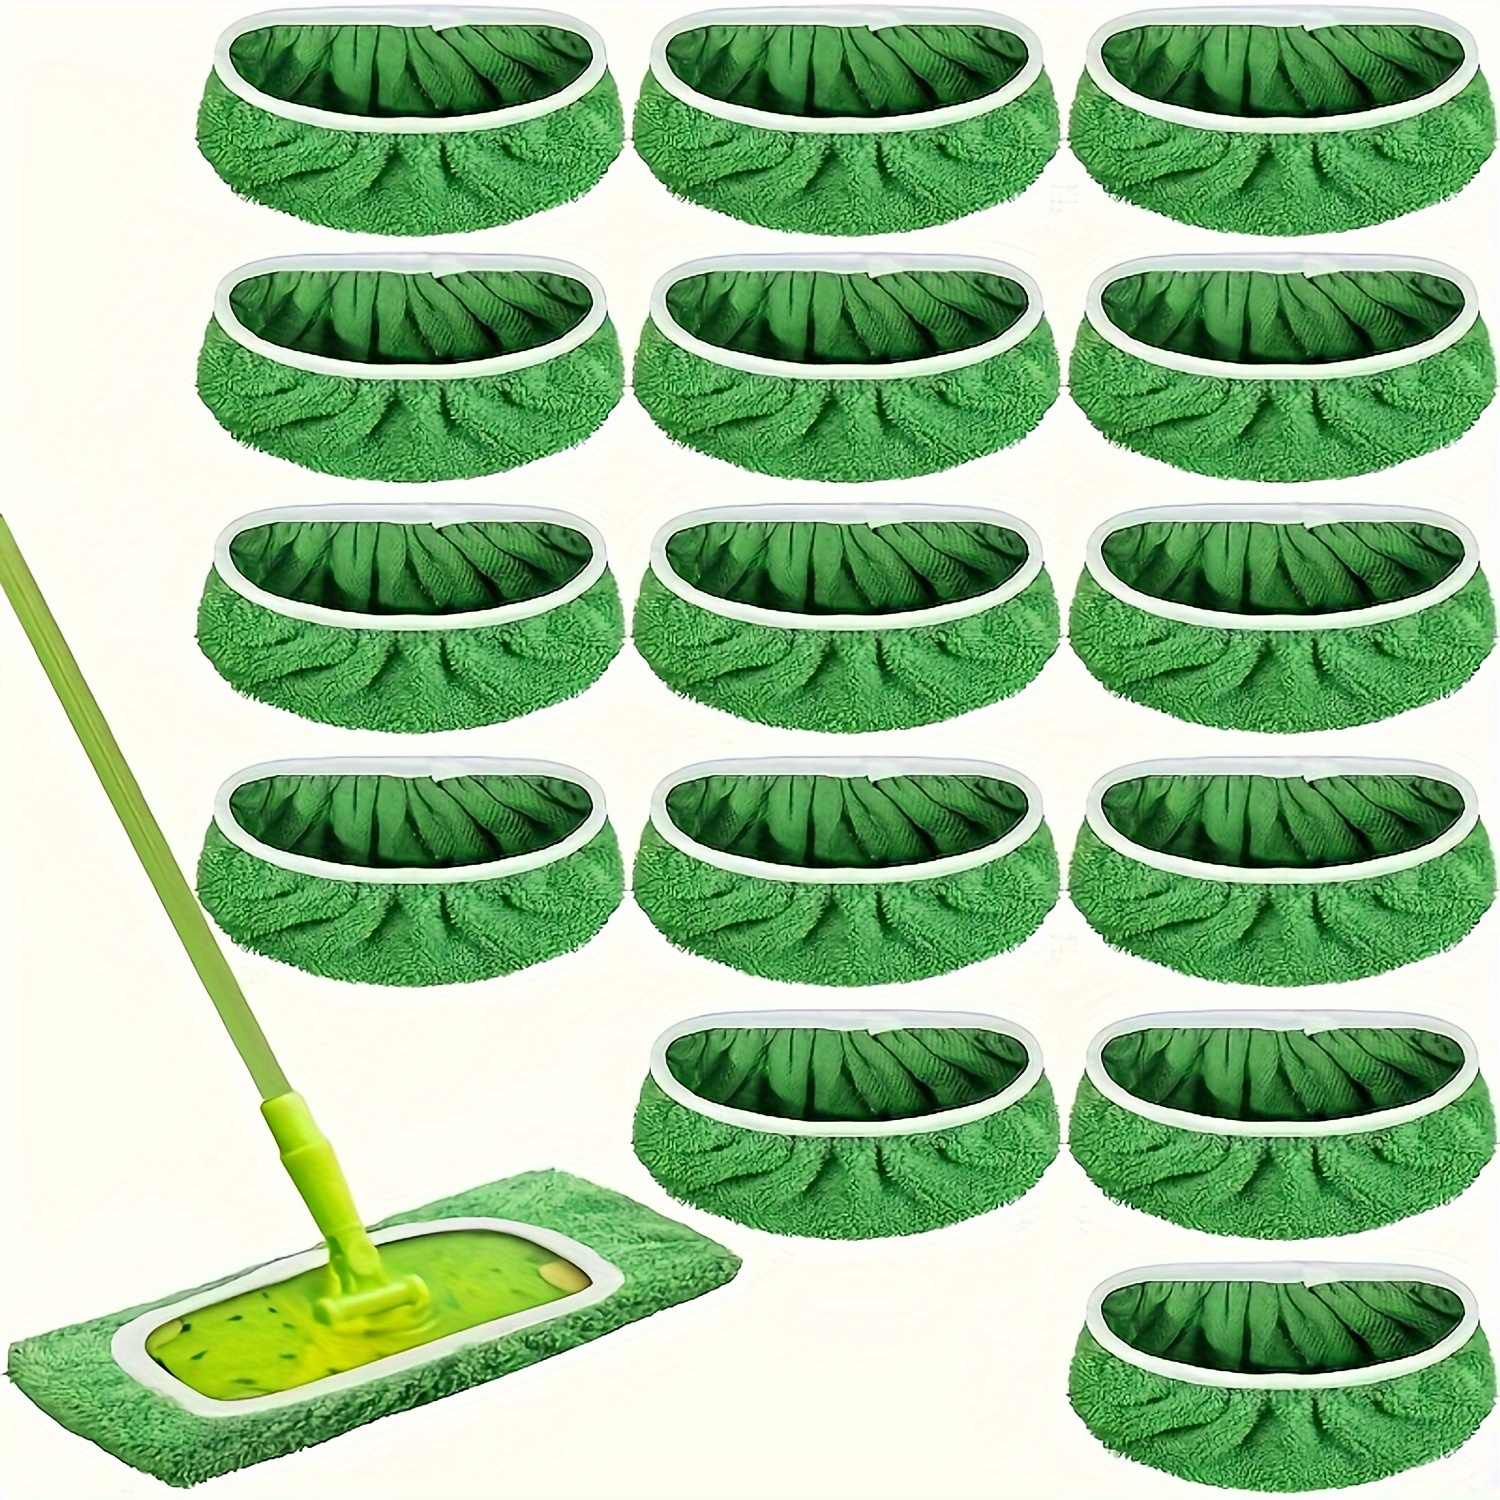 

3/6/9 Reusable Microfiber Mop Pads - Washable And Durable, Suitable For Wet Or Dry Cleaning, Easy To Dust, Basic Household Cleaning Supplies, Can Be Used On All Hard Floors